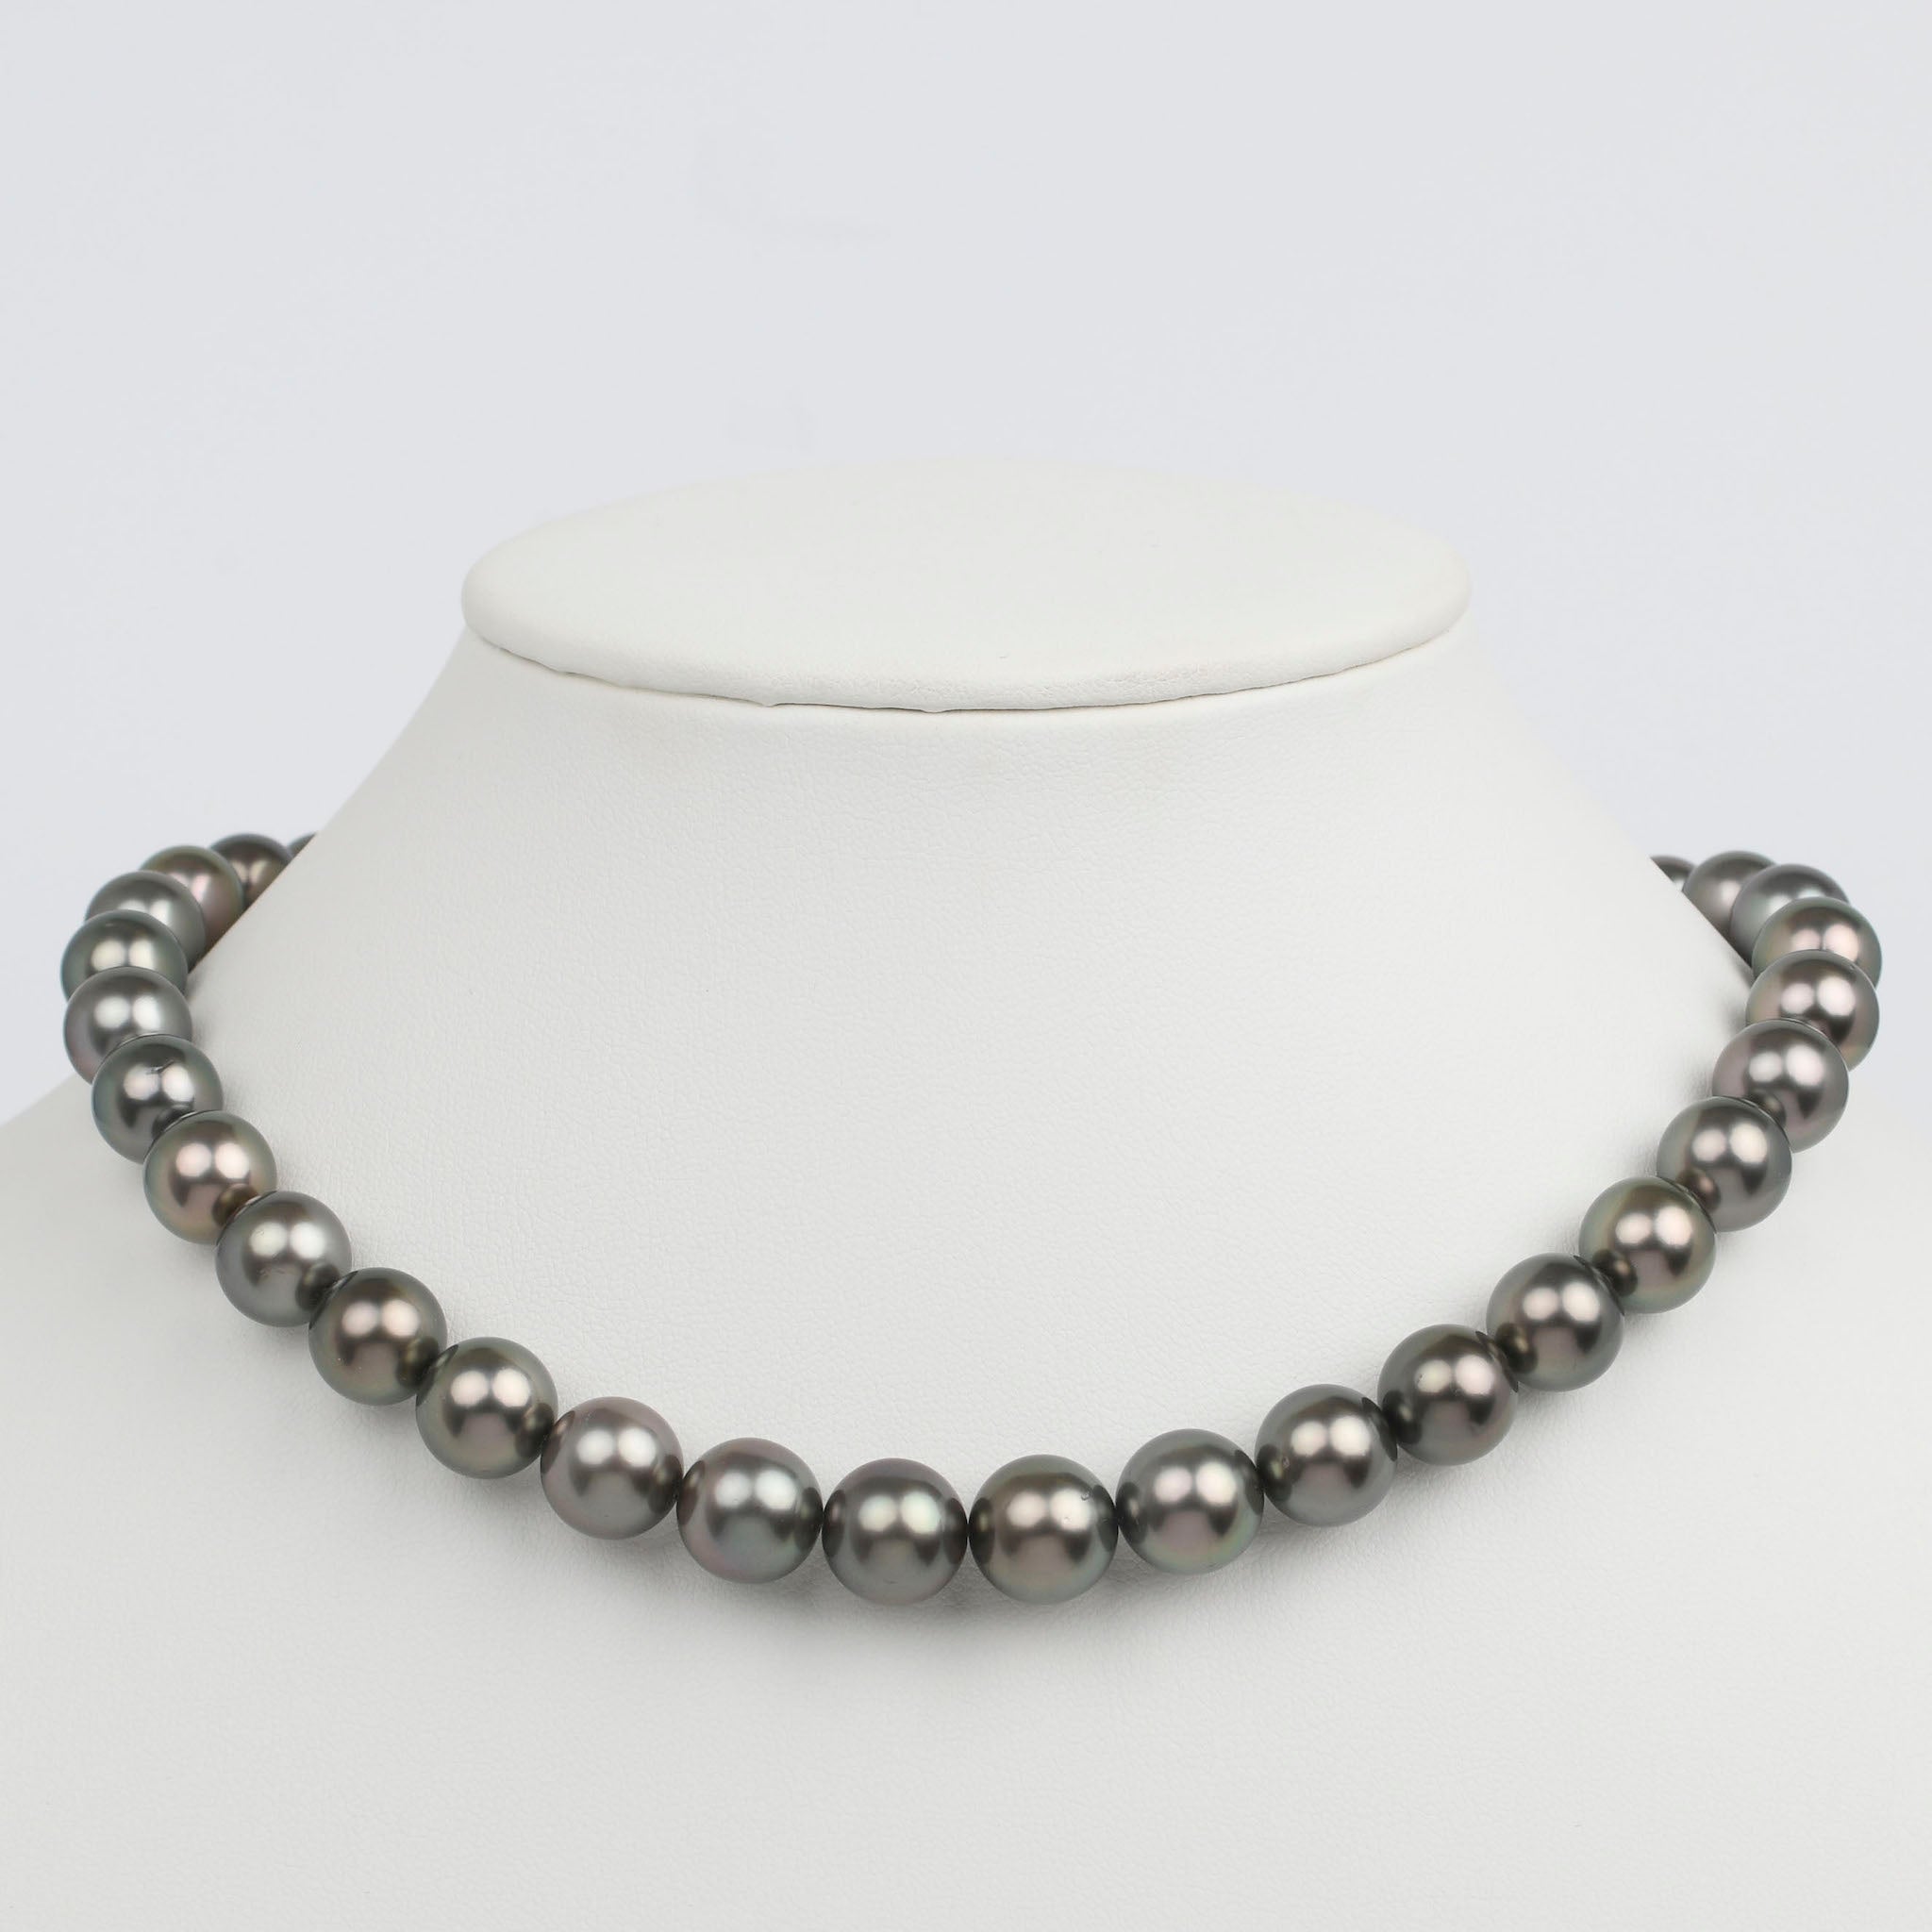 10.0-12.5 mm AAA Tahitian Round Pearl Necklace on bust